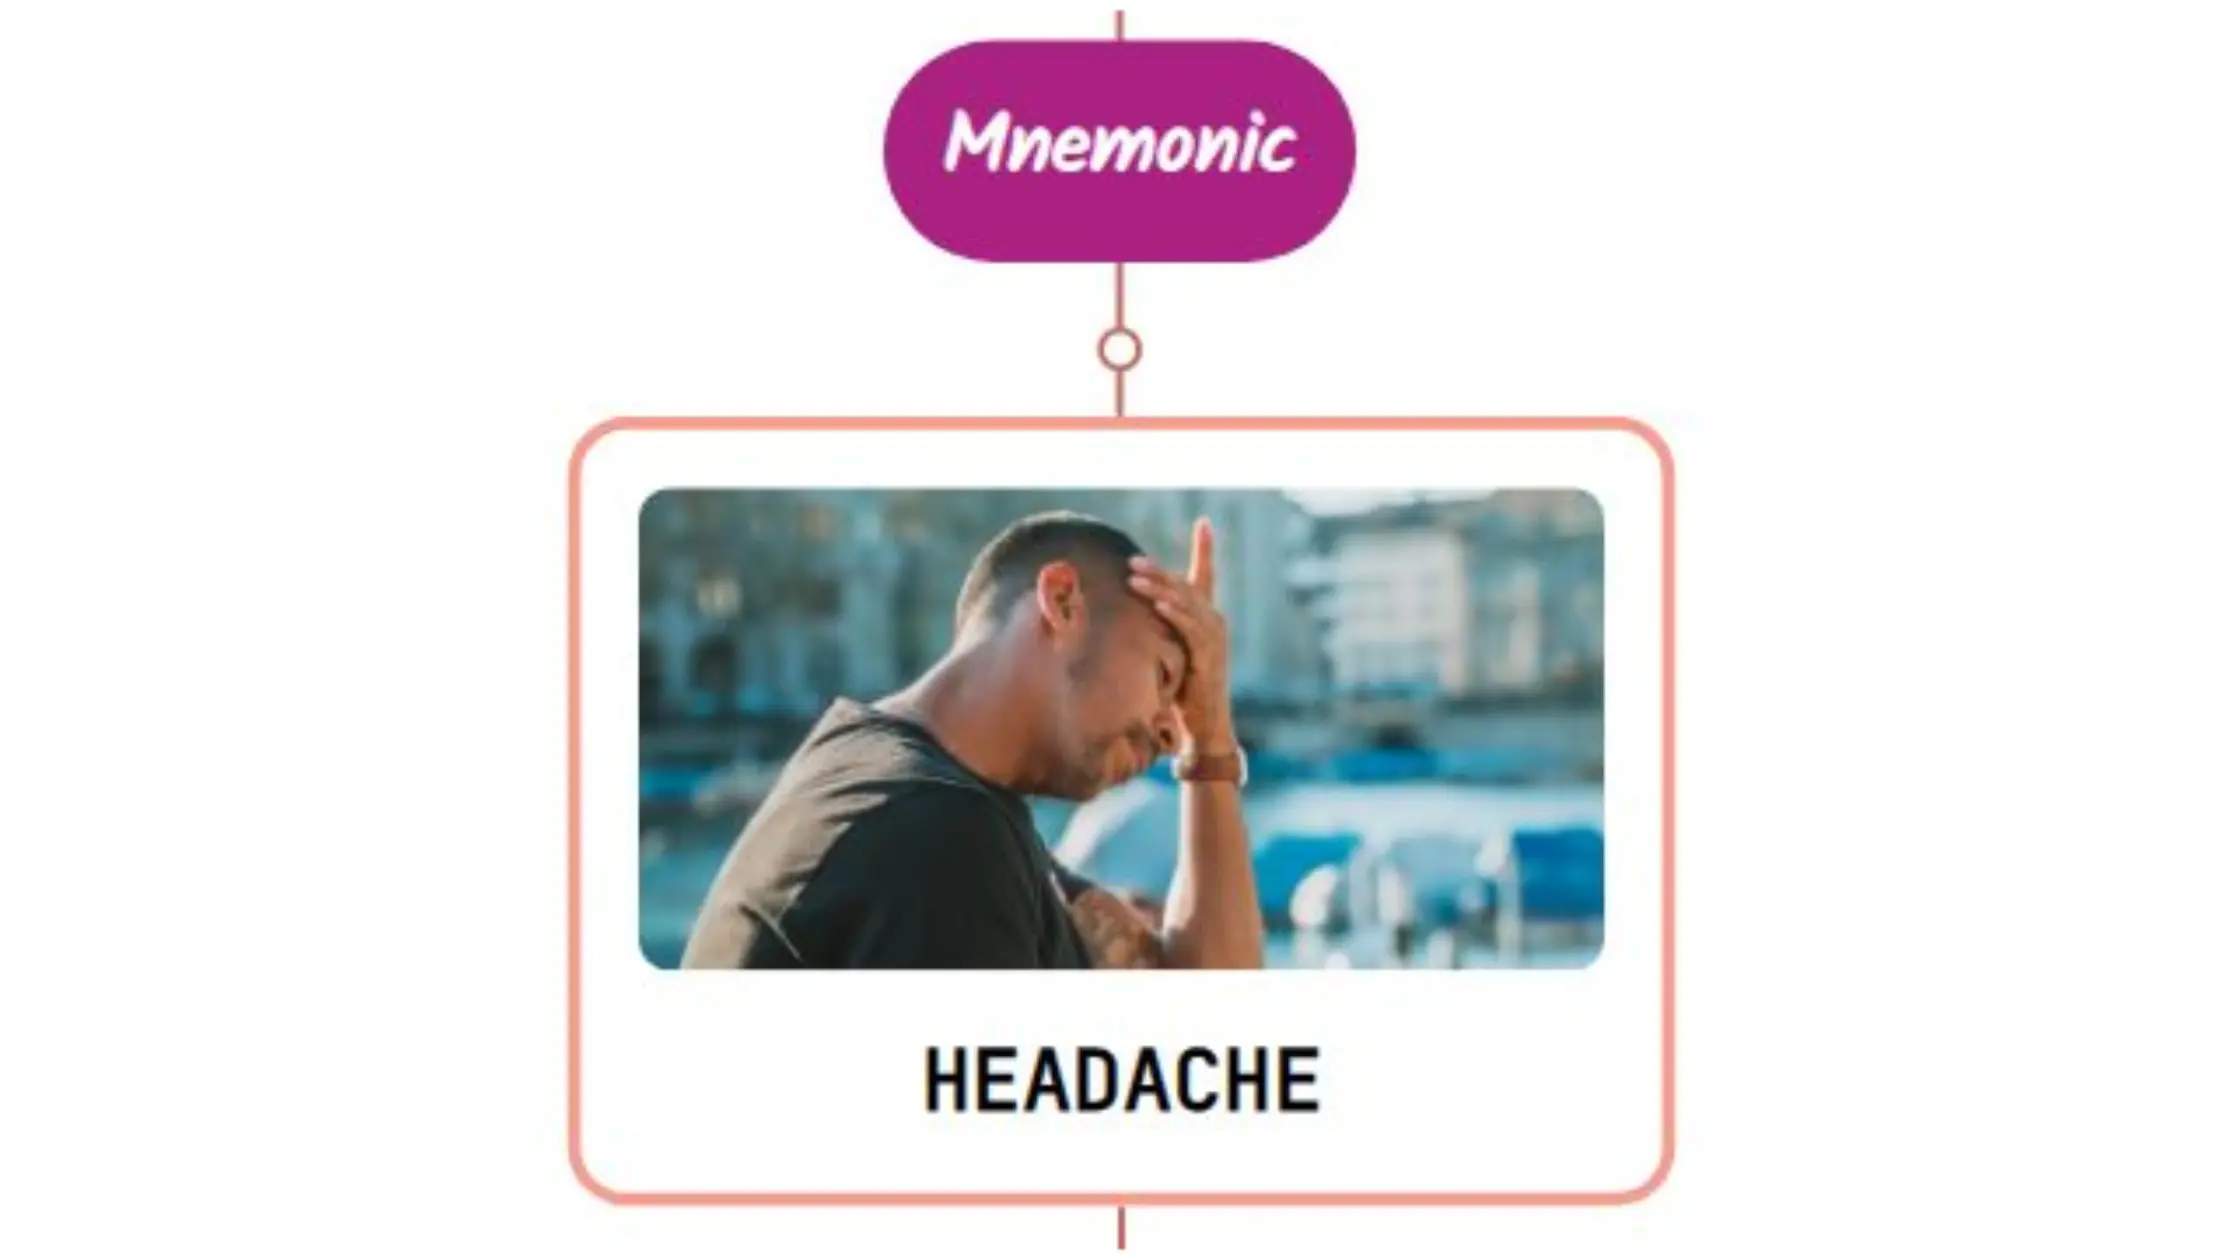 You are currently viewing Post-Traumatic Headache : Mnemonics